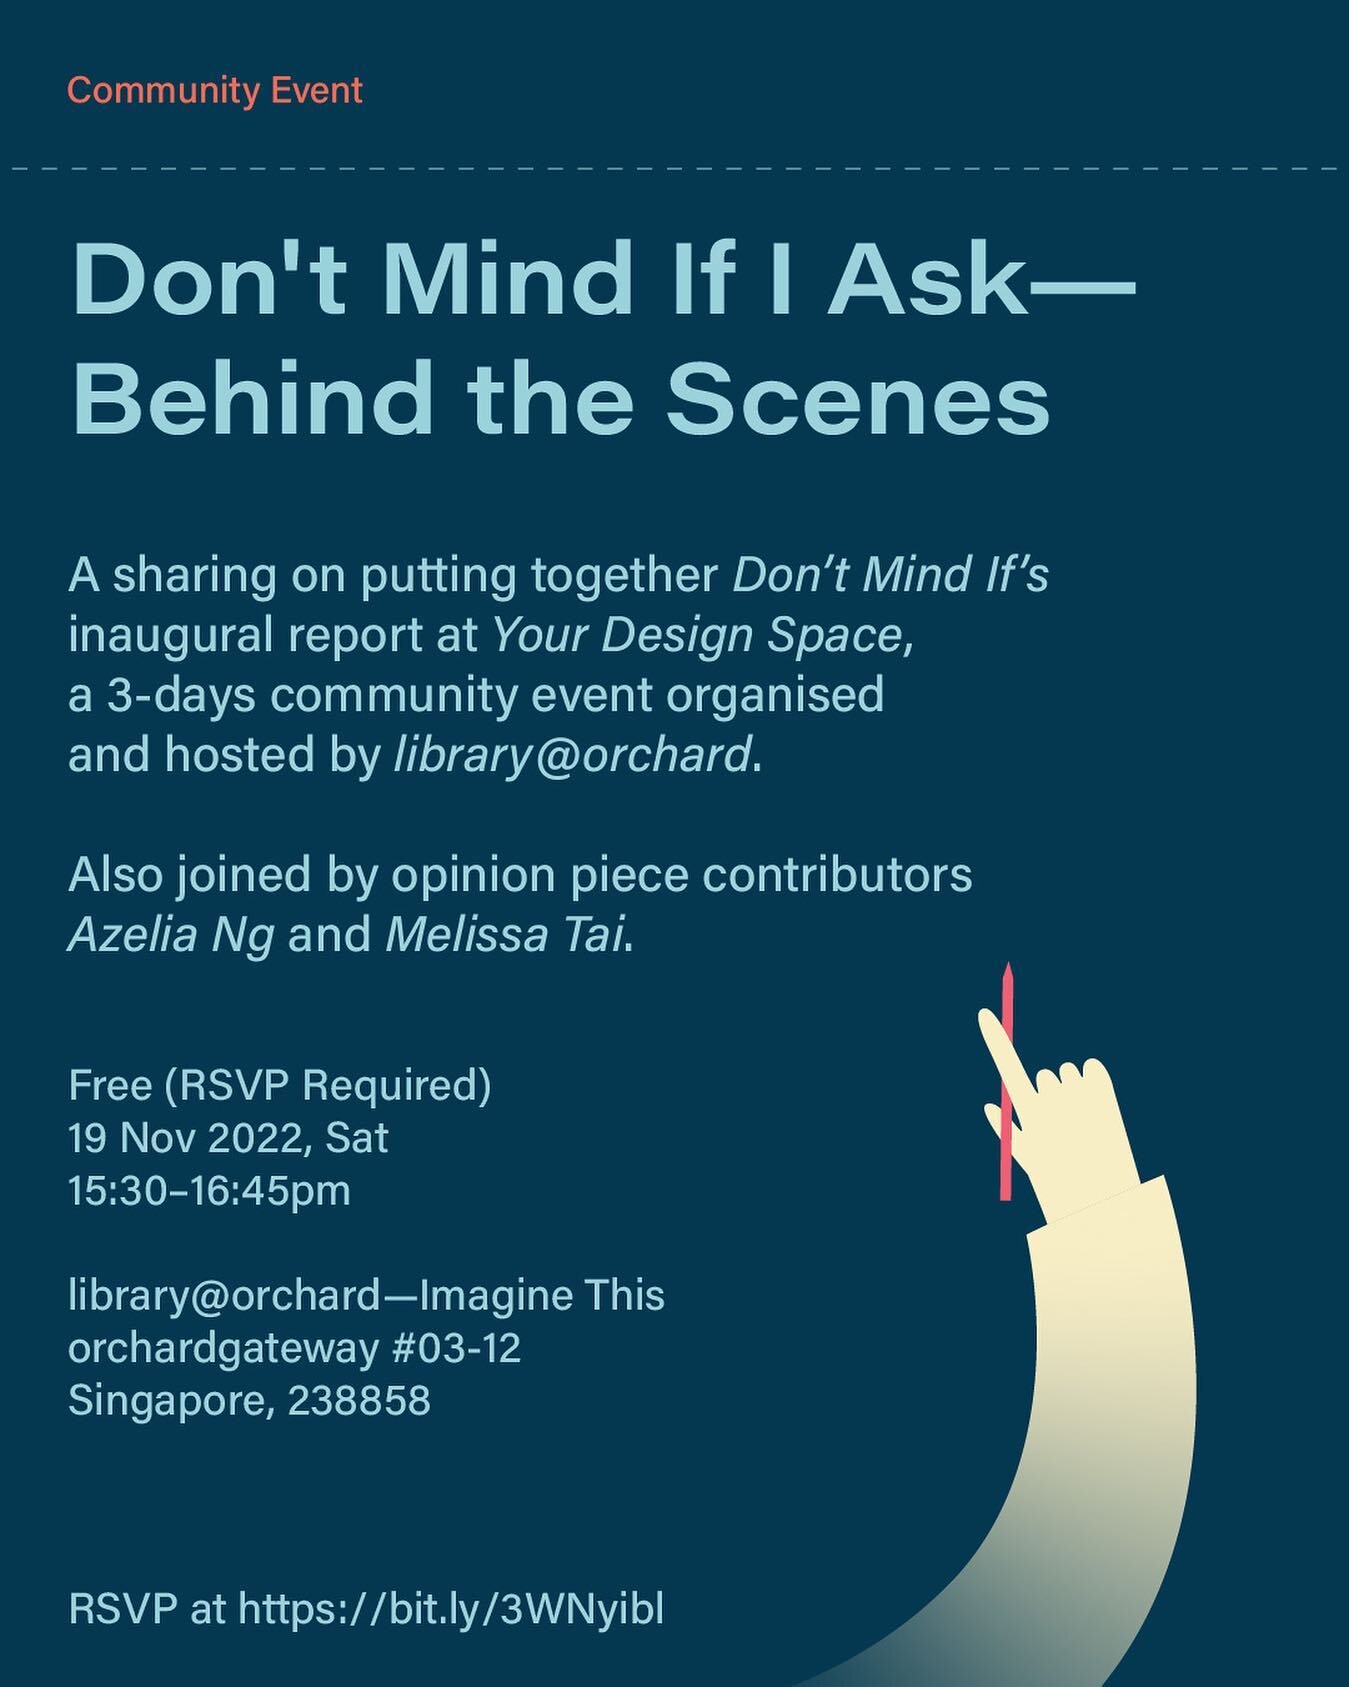 Join us in an upcoming sharing session about putting together #dontmindifiask with library@orchard as part of Your Design Space, a 3-day community event about design. We're very excited to have @azelia_nwz and @melissajtai who are joining us this ses